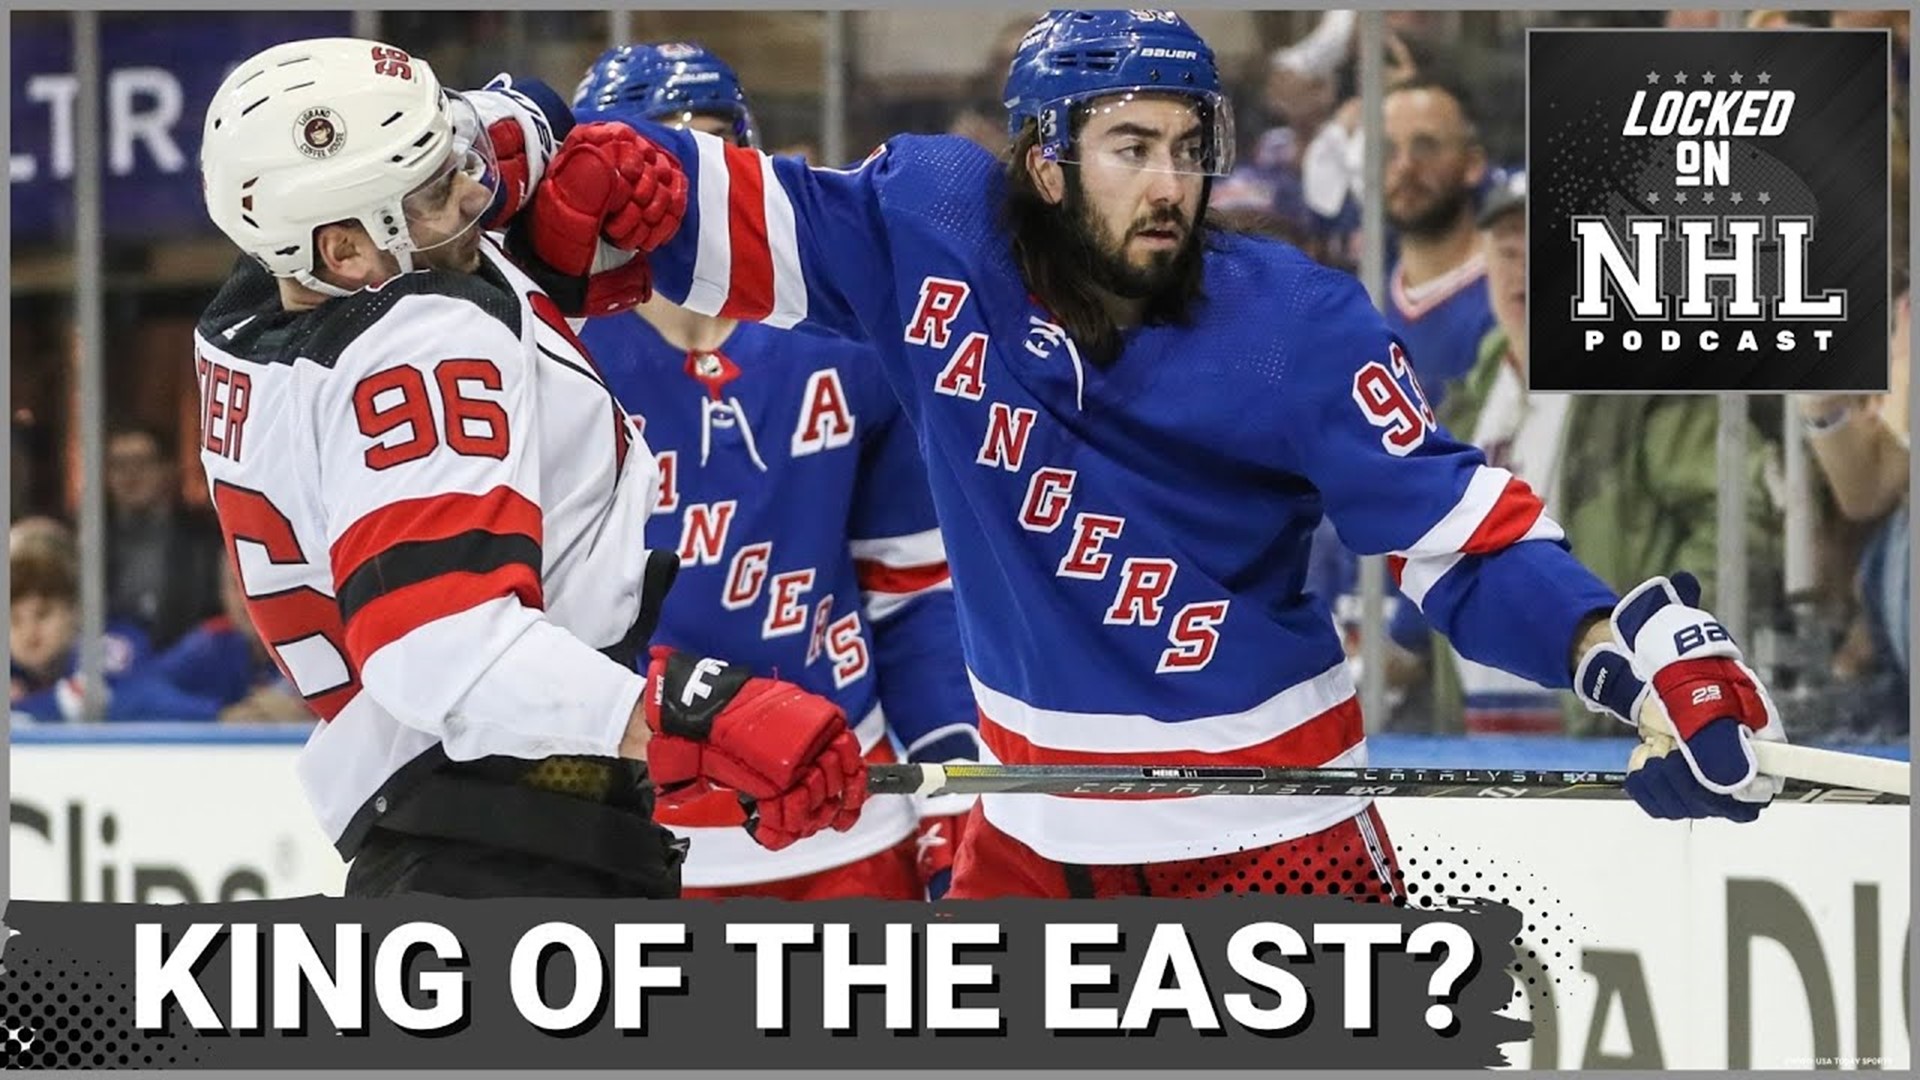 Ross Levitan (Locked On Senators) and Mike DiStefano (Locked On Maple Leafs) highlight the New Jersey Devils and New York Rangers as the two top Eastern Conference